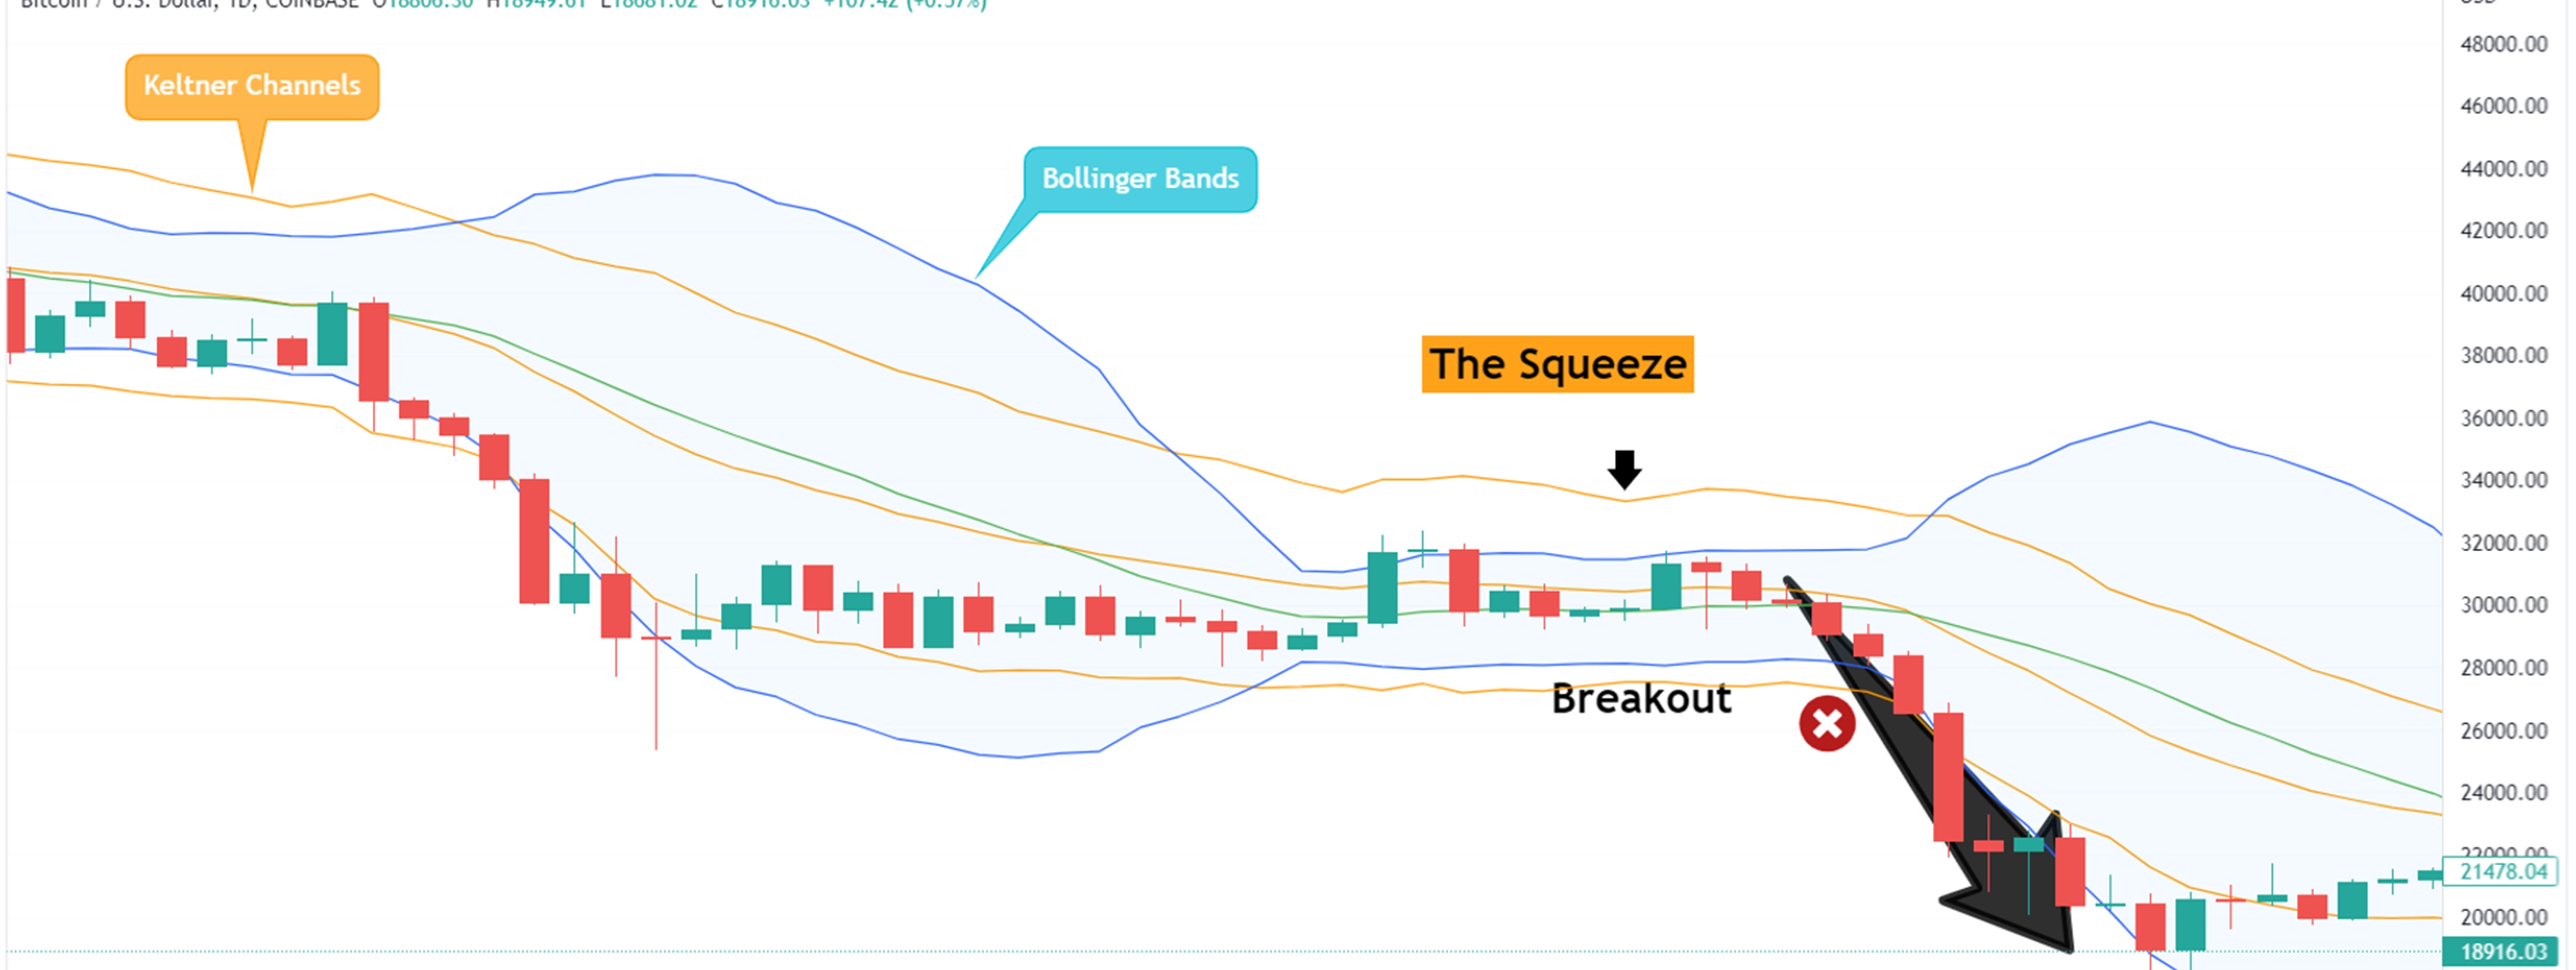 Breakout example